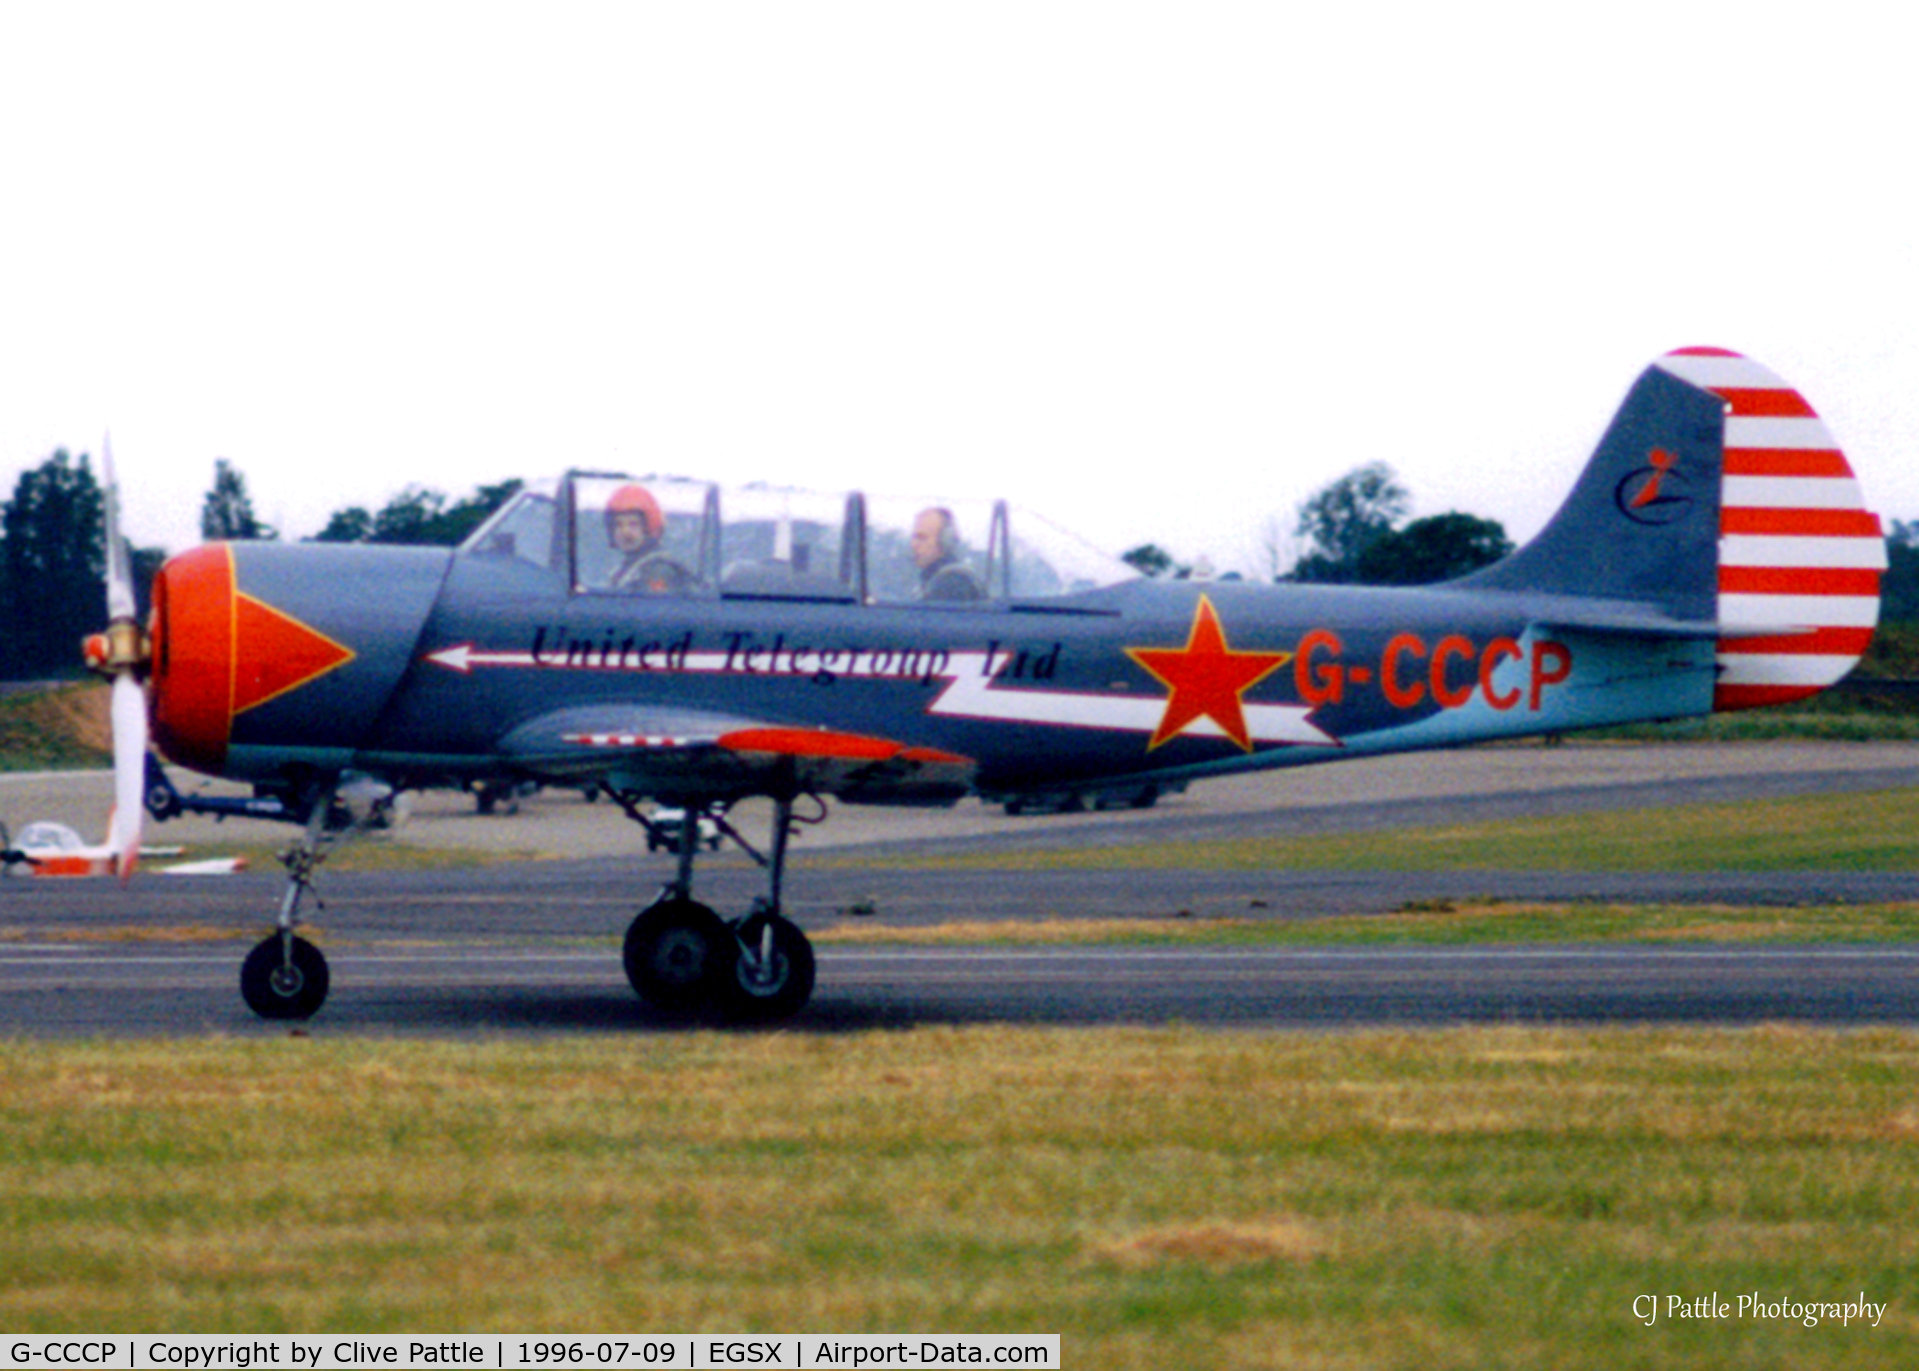 G-CCCP, 1982 Bacau Yak-52 C/N 899404, Scanned from print, Yak-52 G-CCCP taxies out from North Weald, July '96.